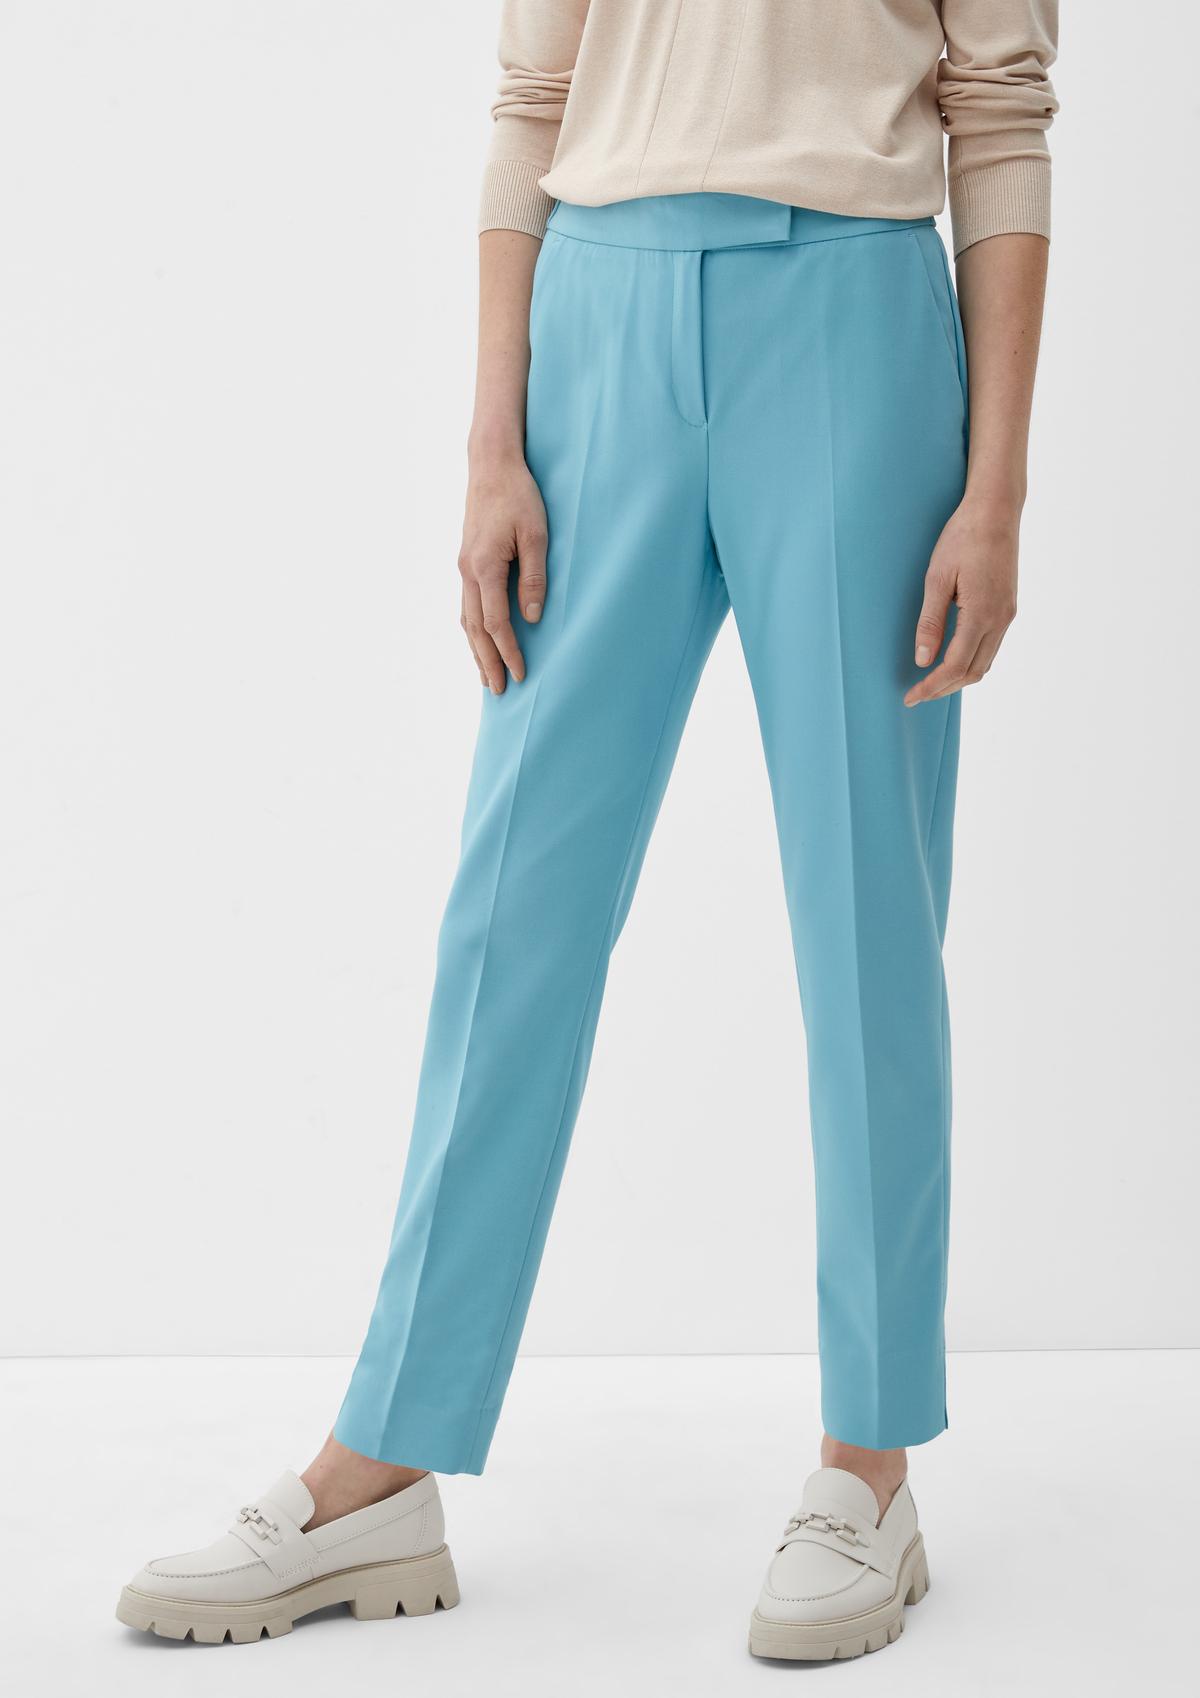 s.Oliver Sue: trousers with a slim leg